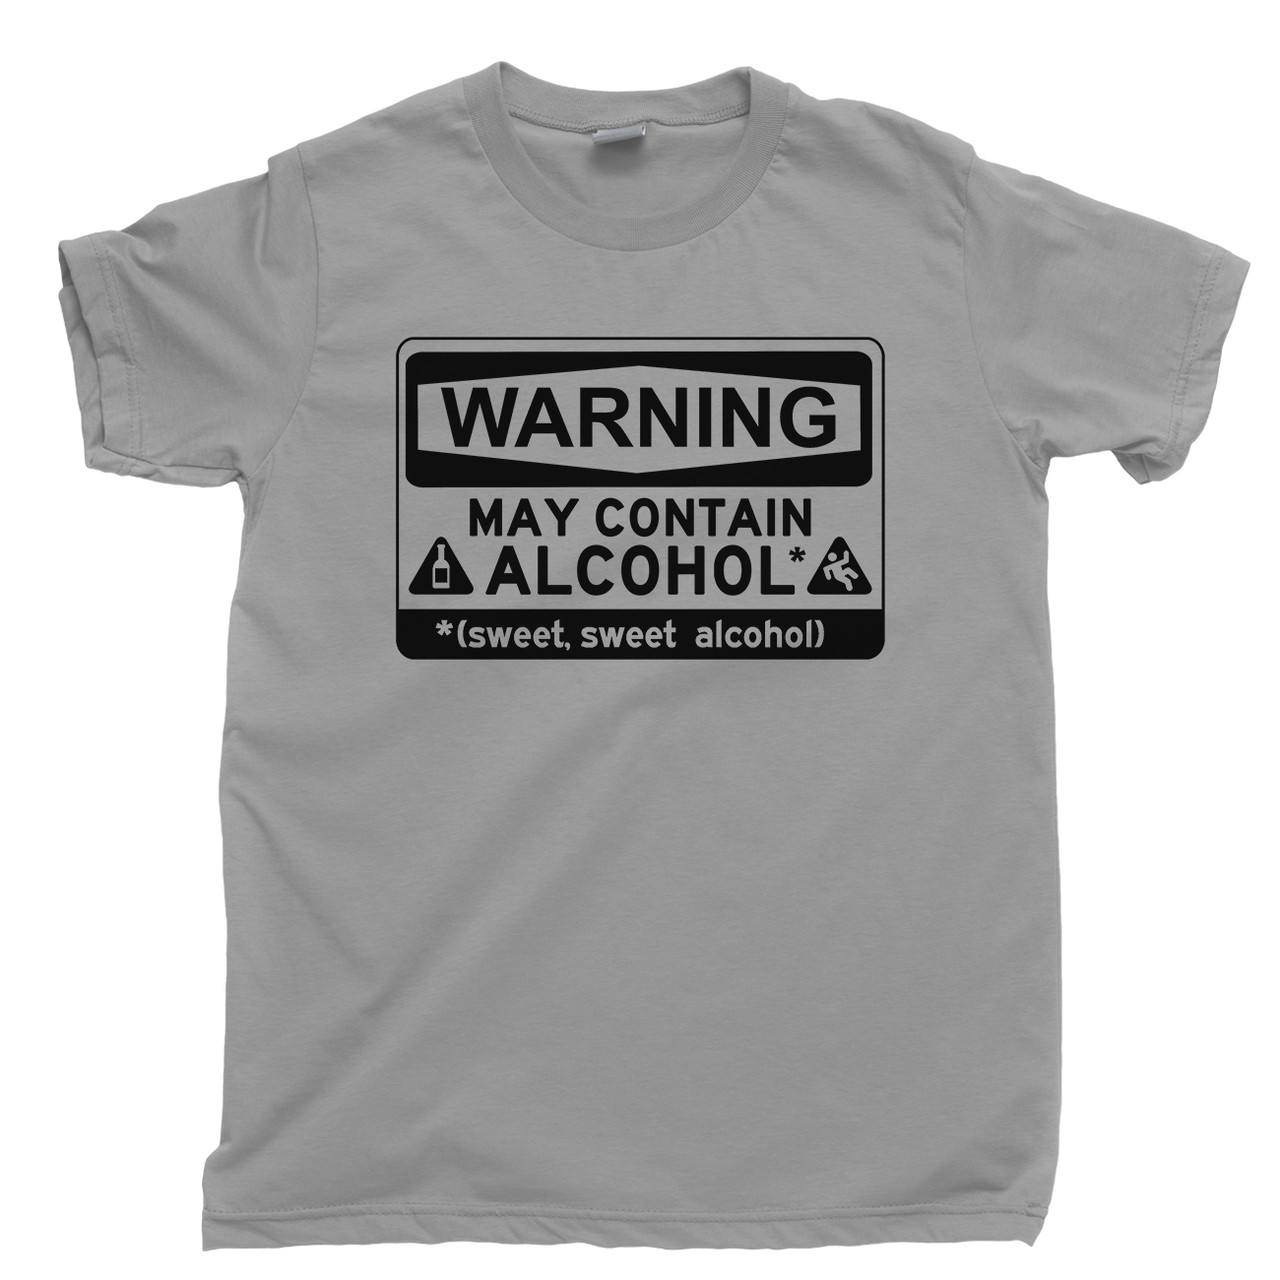 Warning May Contain Alcohol T Shirt - Whiskey, Rum, Tequila, Vodka ...